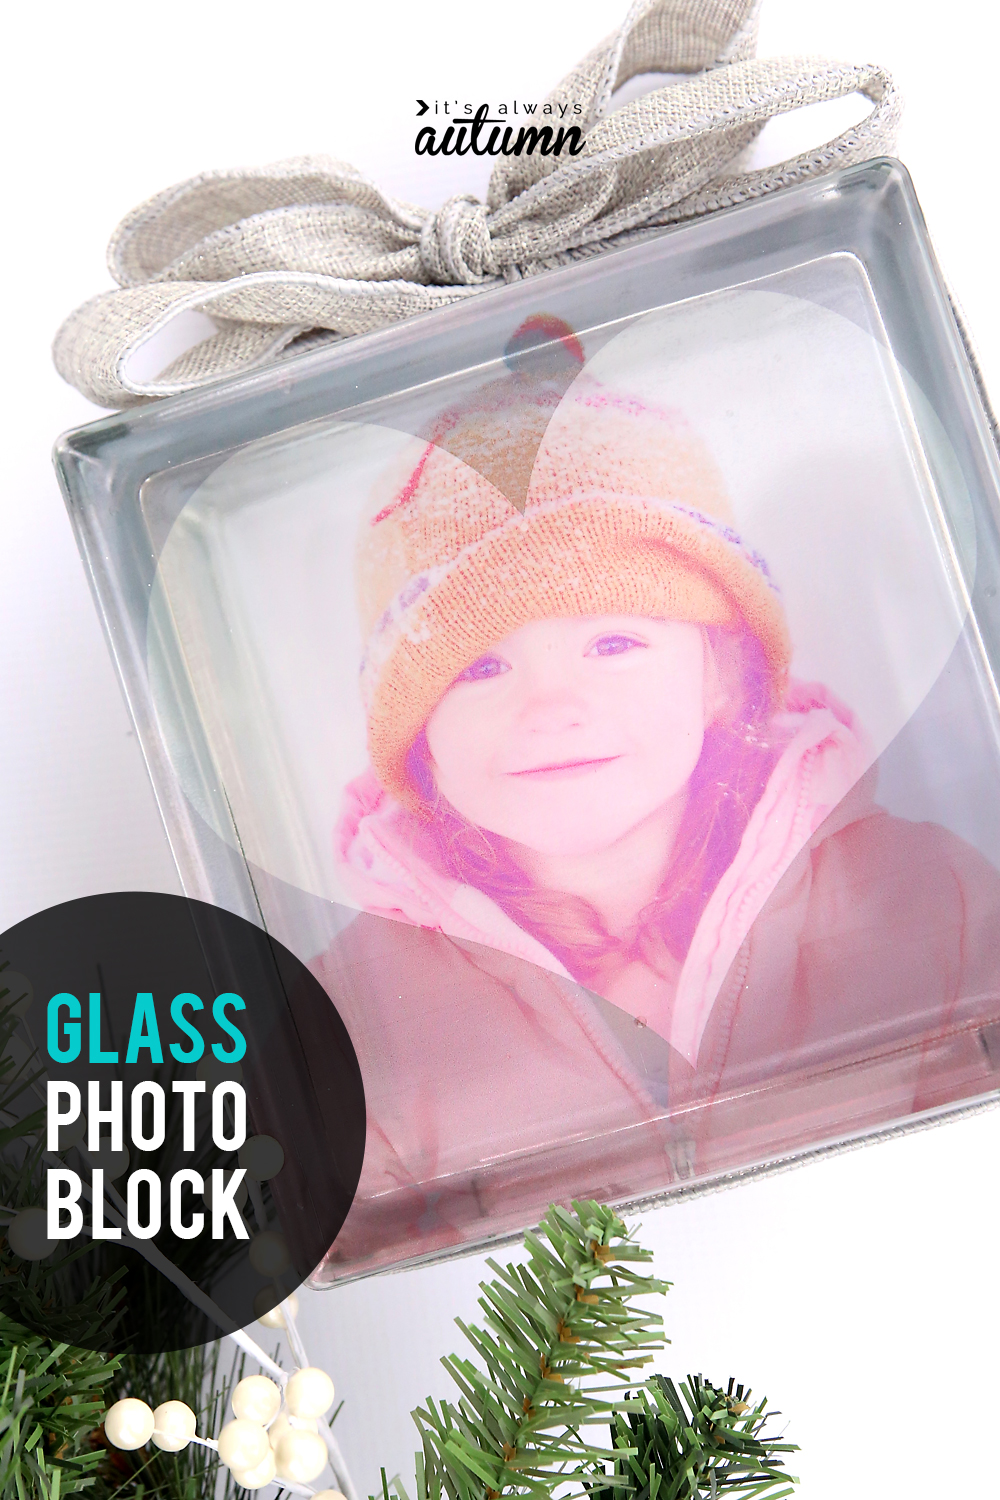 Learn how to make a beautiful glass photo block in 10 minutes! Click through for easy instructions.